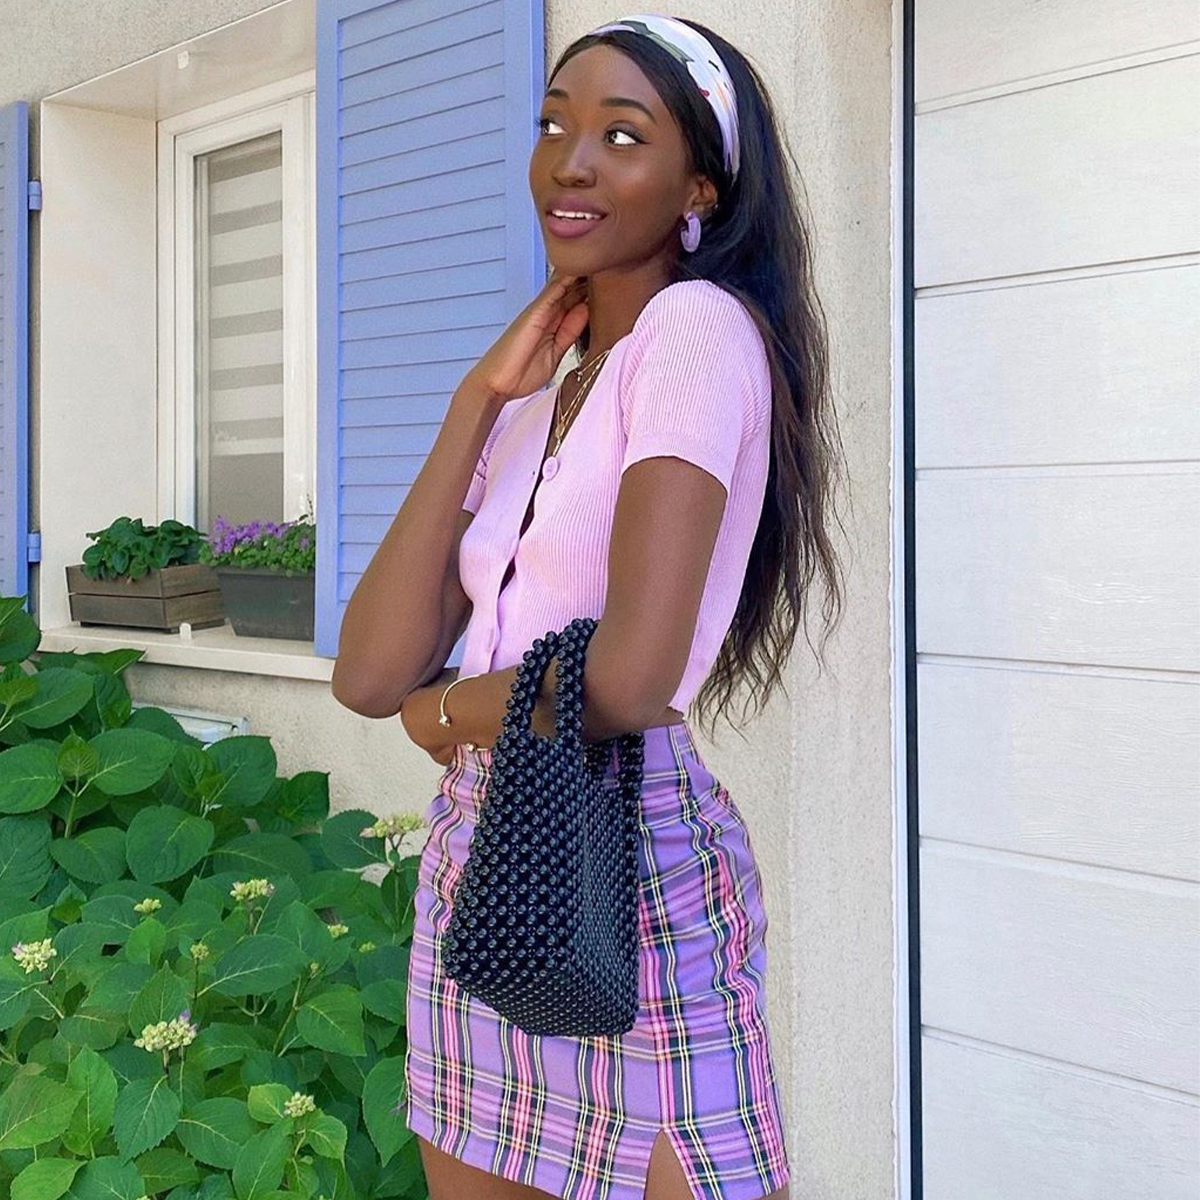 11 Plaid-Skirt Outfits to Try This Season